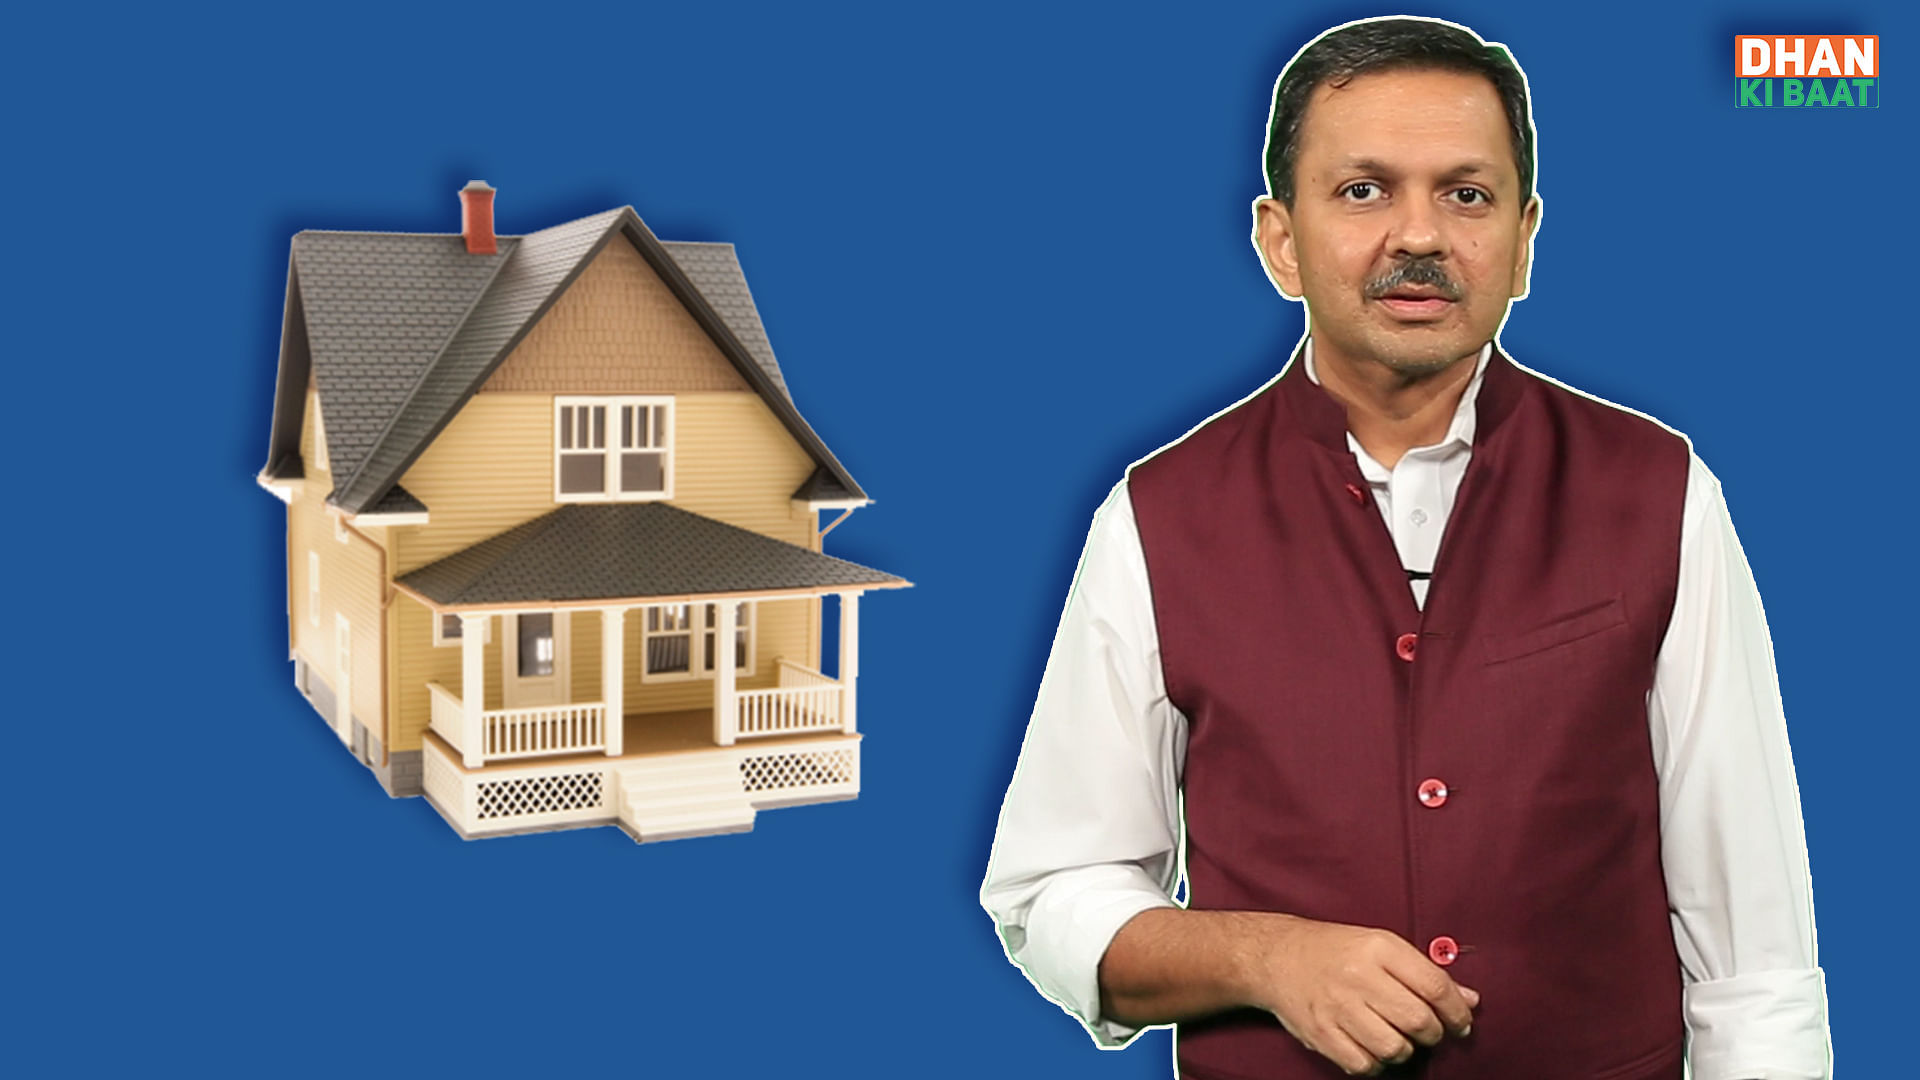 In this episode of Dhan ki Baat, we bring you all the information related to investment in real estate.